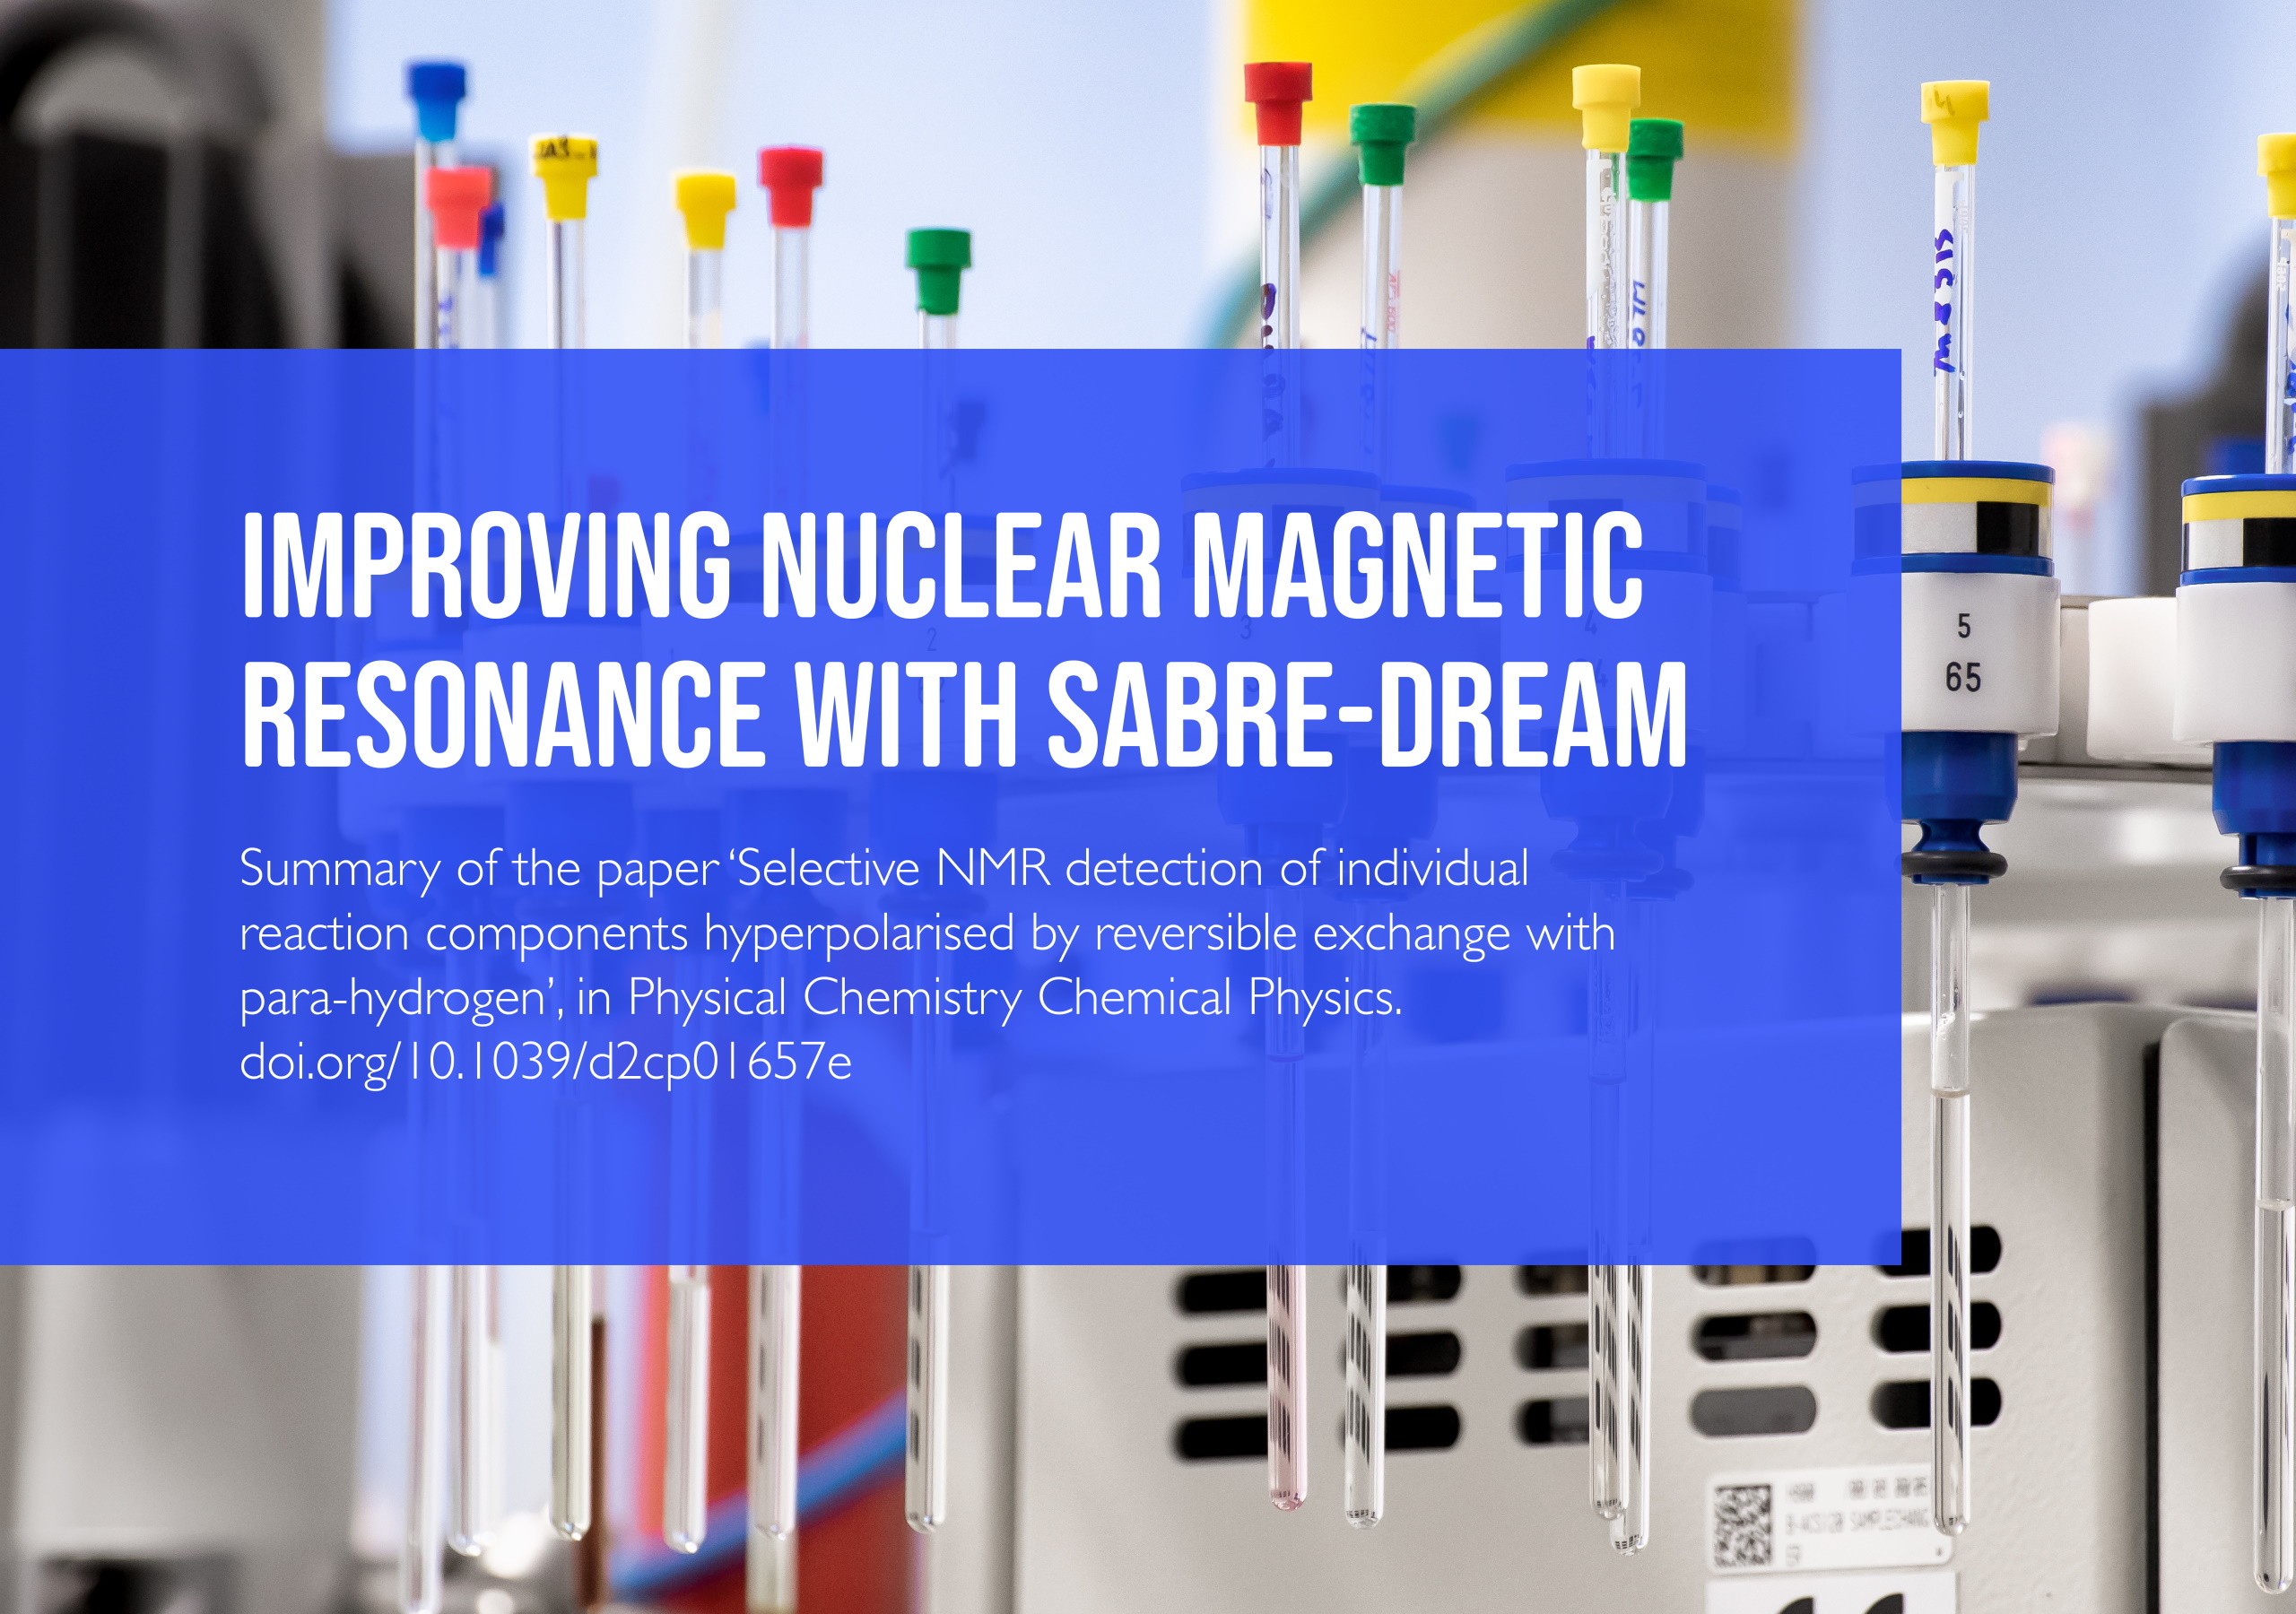 Dr Philip Norcott | Improving Nuclear Magnetic Resonance with SABRE-DREAM